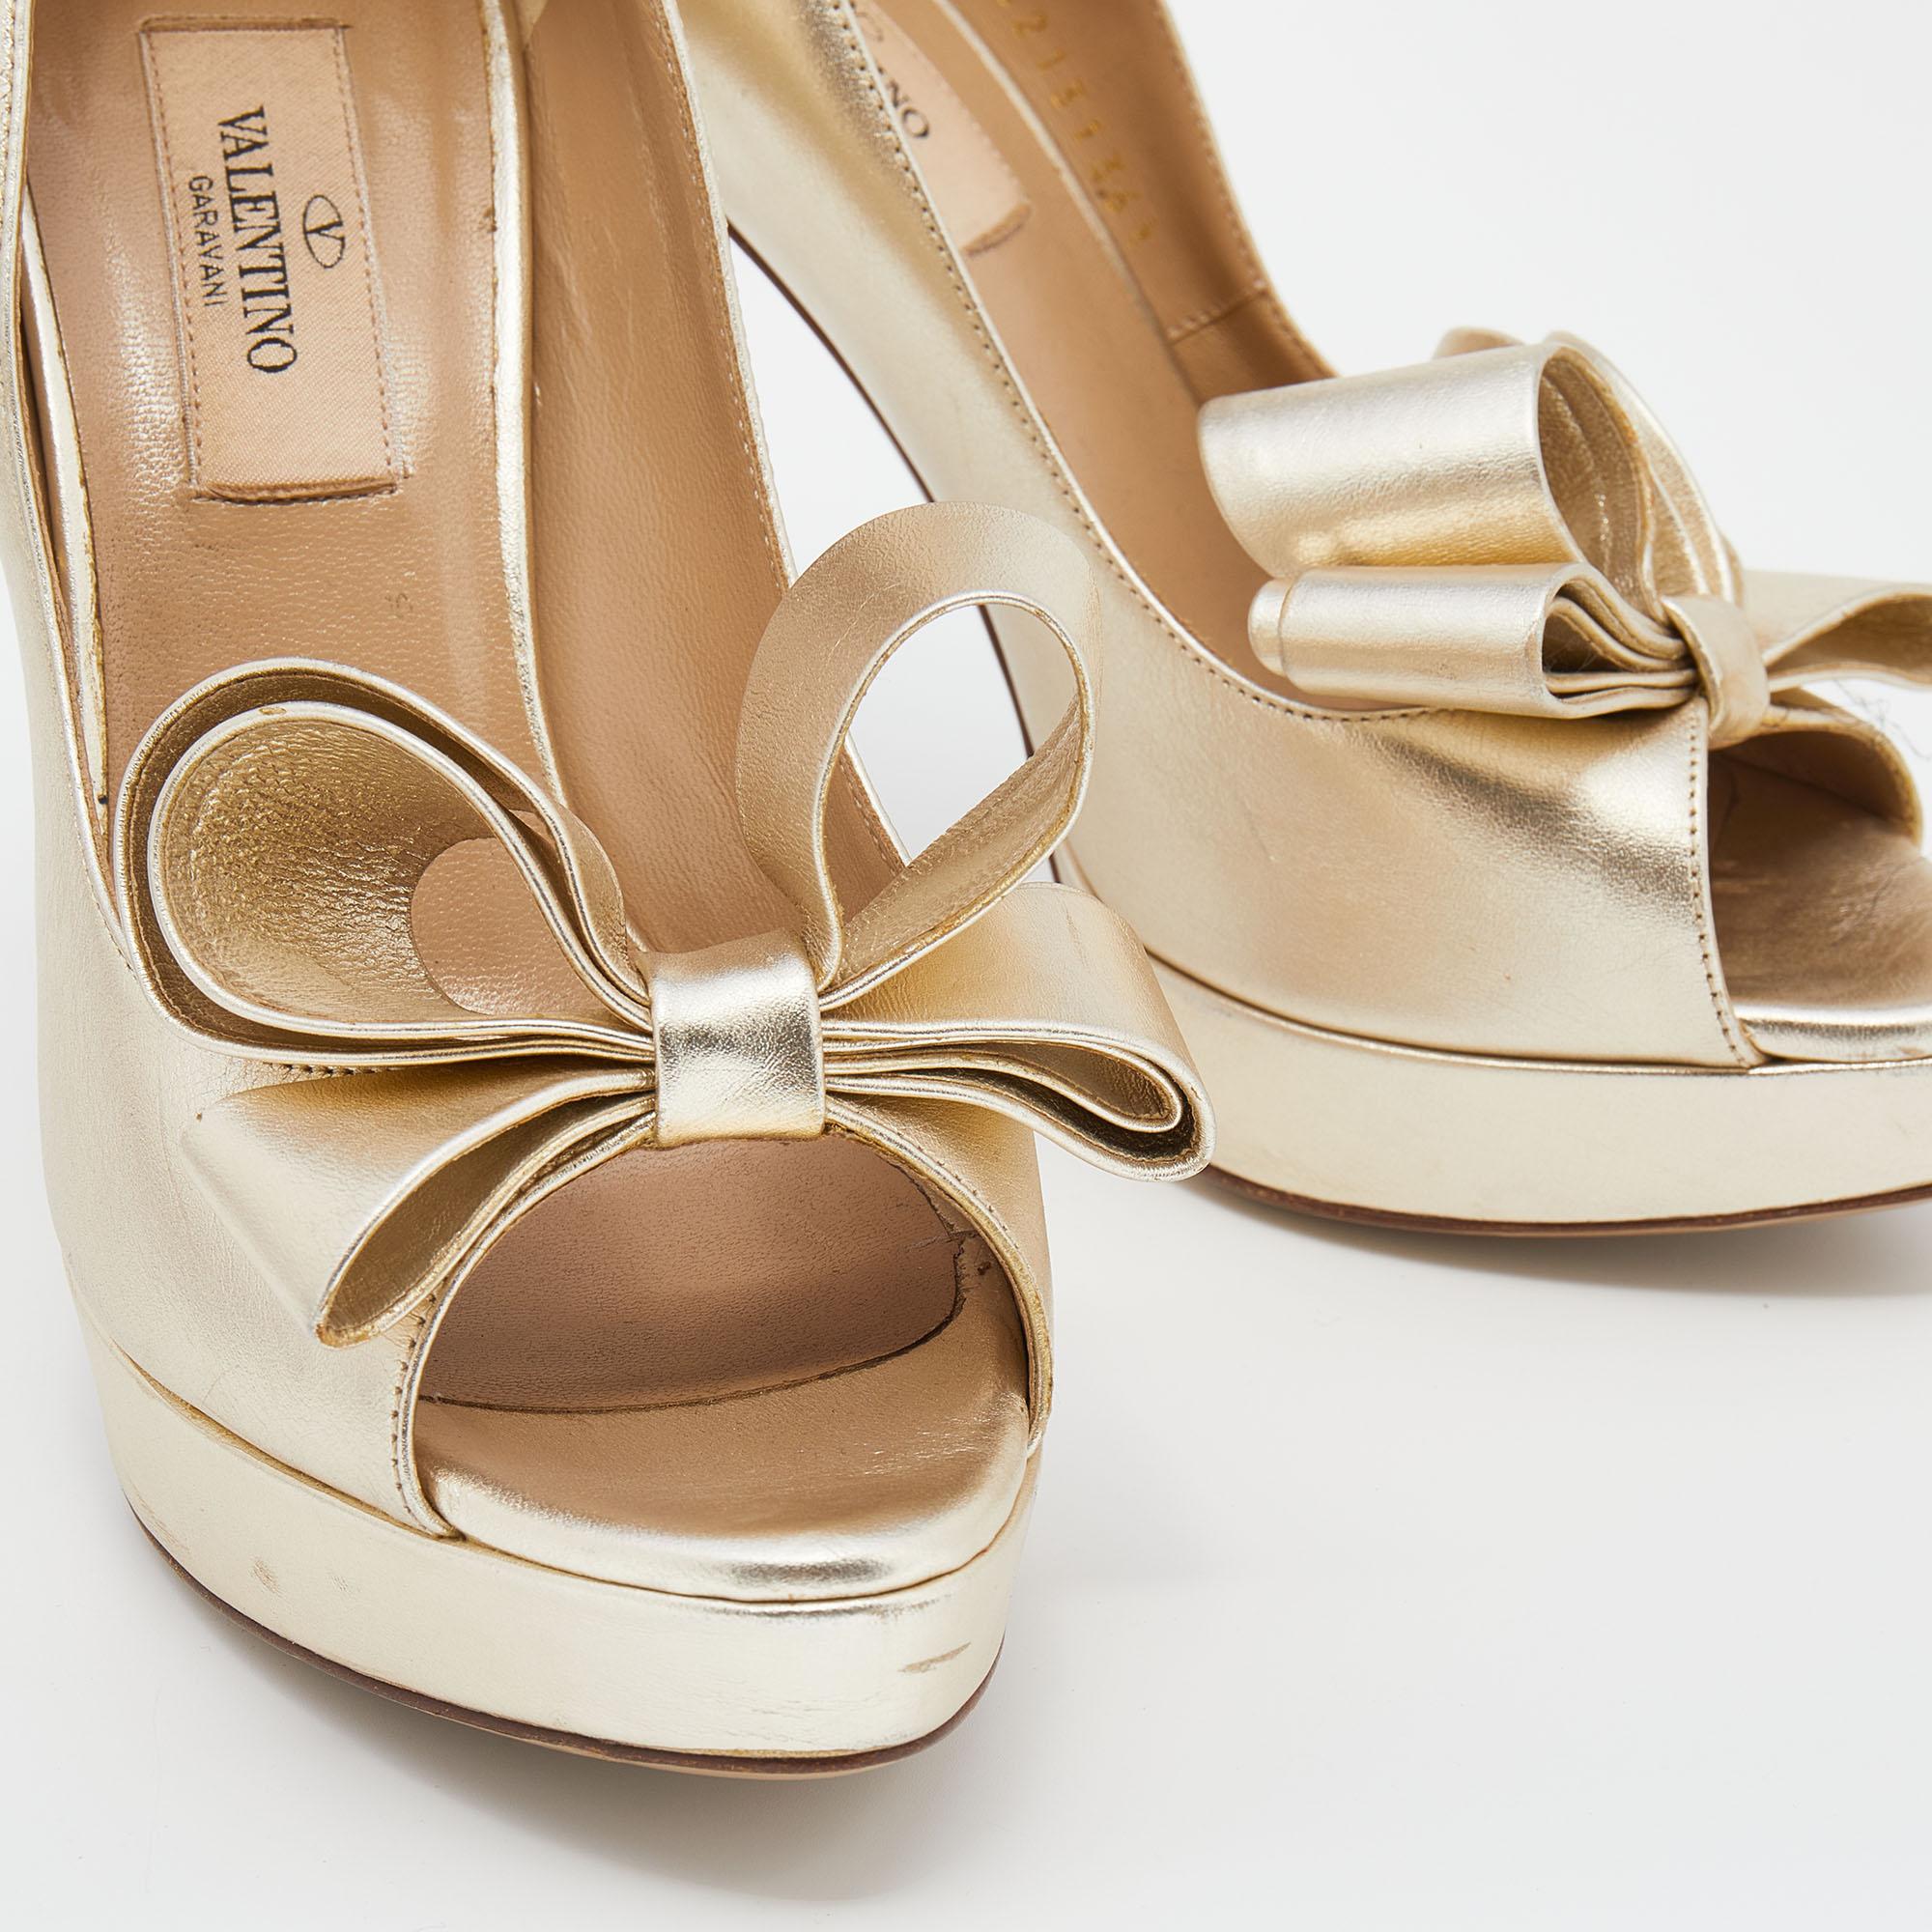 Create an aura of elegance with these stunning peep-toe pumps from Valentino. These metallic gold pumps are crafted from leather. The pair flaunts couture bow detailing on the uppers, leather-lined insoles, solid platforms, and 12 cm heels.

